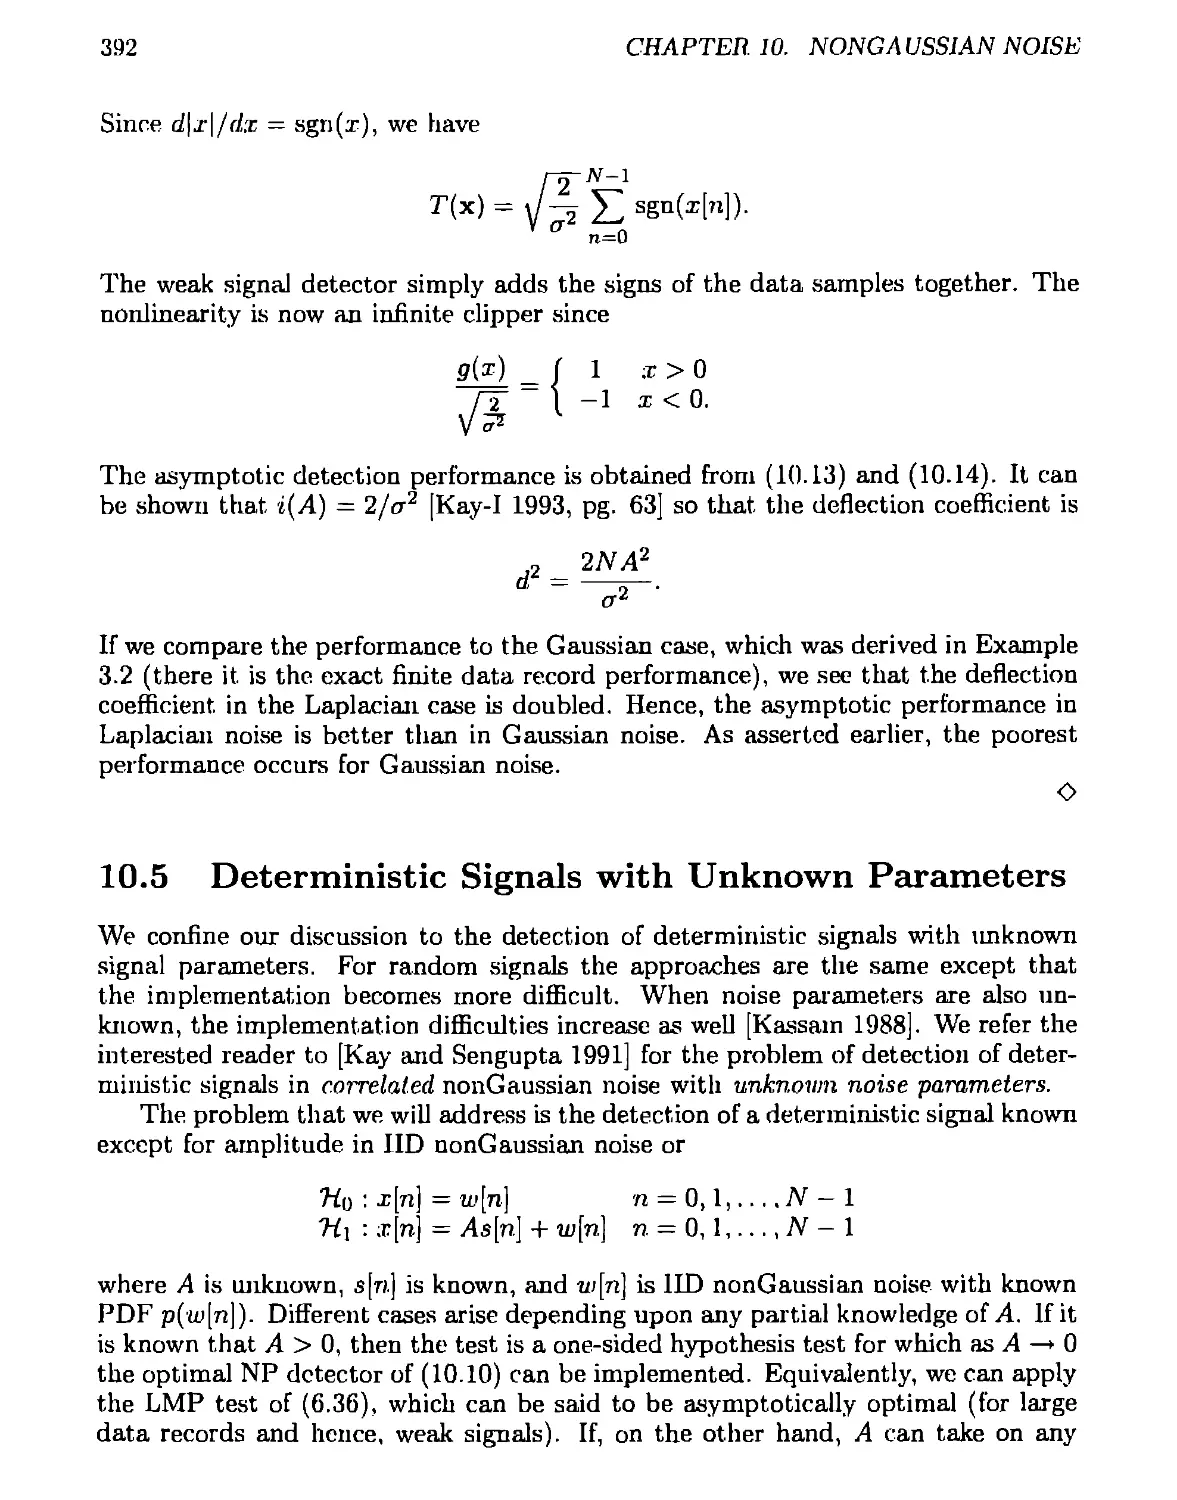 10.5 Deterministic Signals with Unknown Parameters